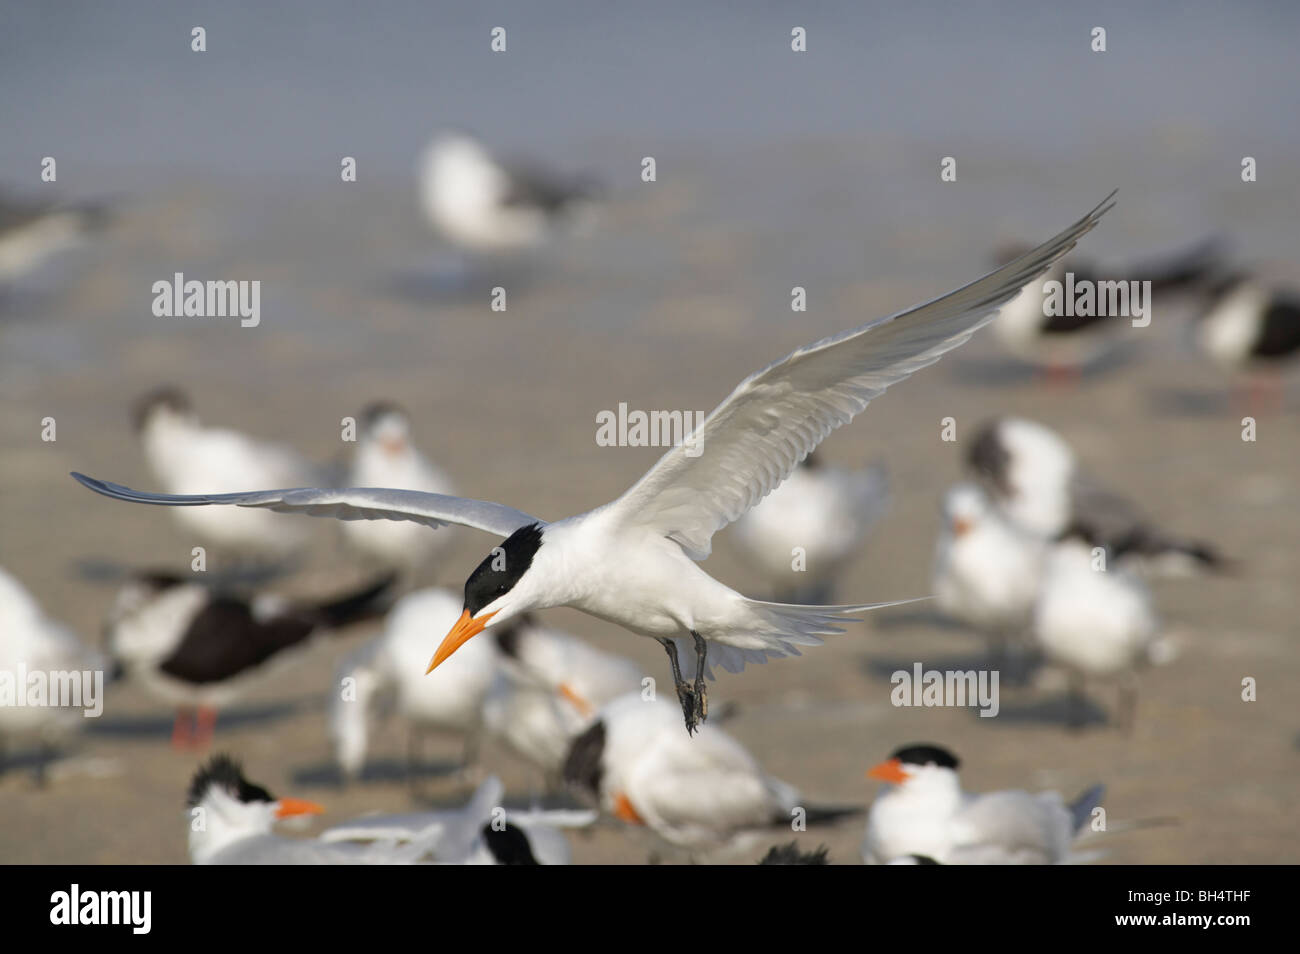 Royal tern (Sterna maxima) flying into roosting site at Fort de Soto, Florida, USA Stock Photo